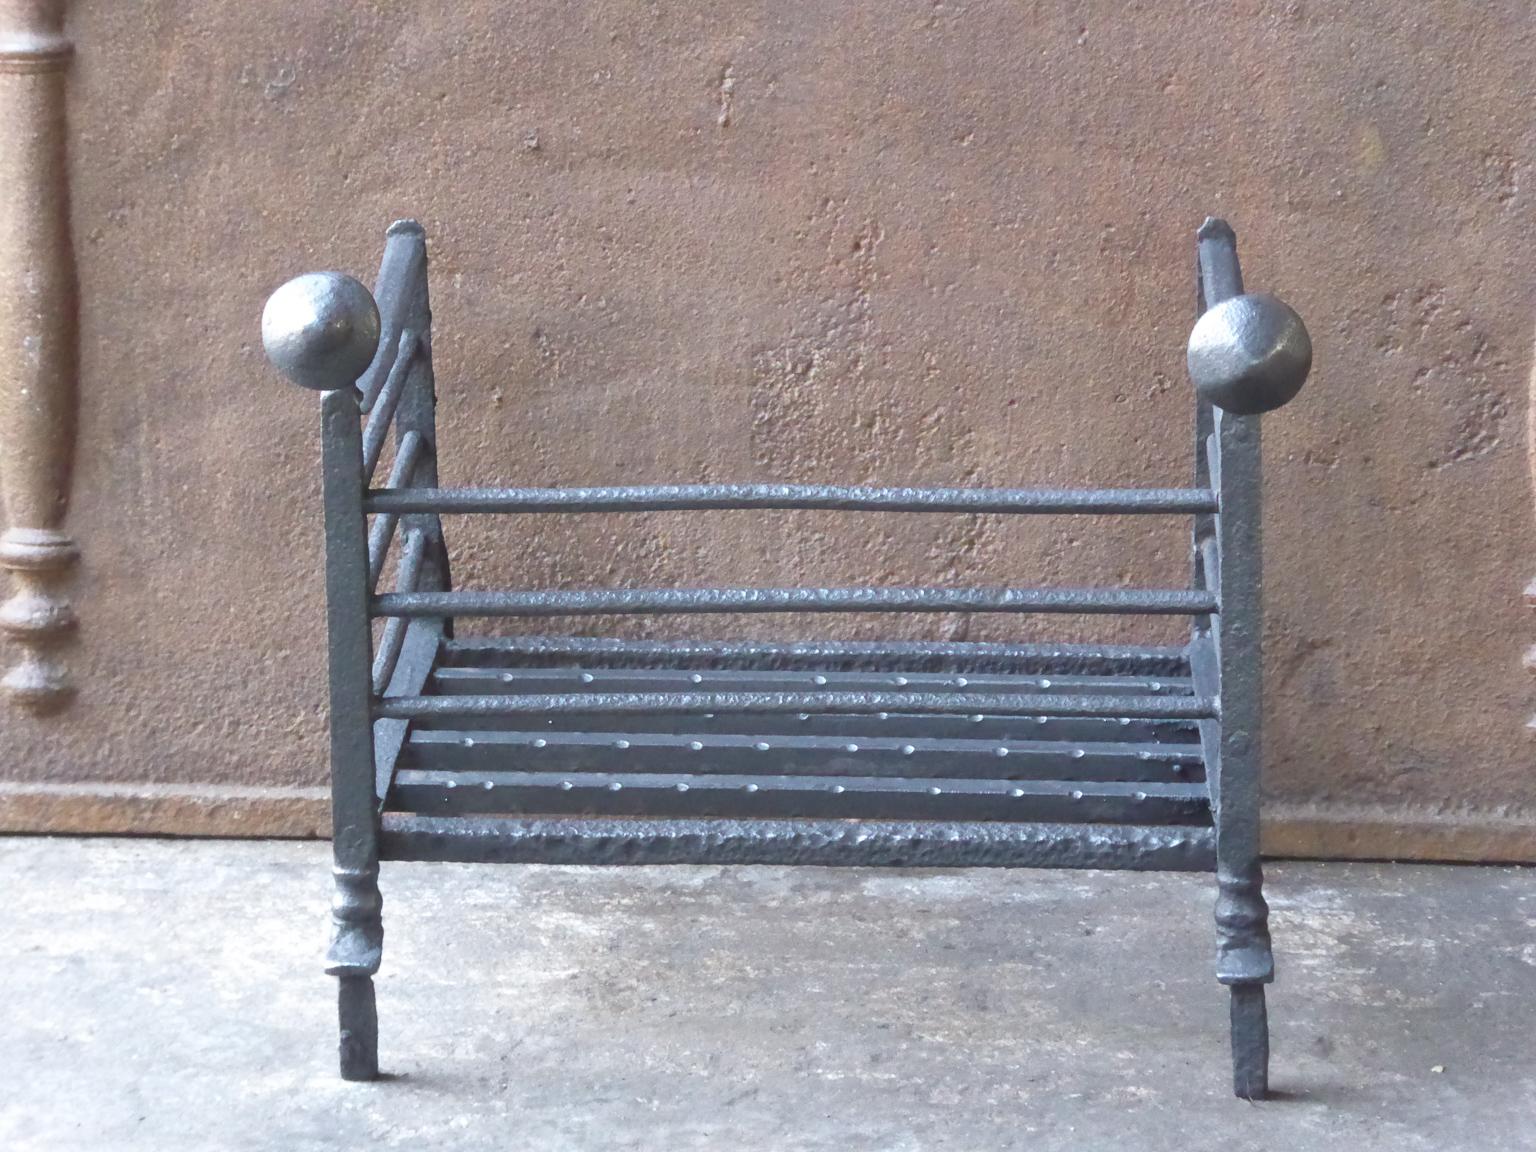 18th century Dutch fireplace basket - fire grate made of wrought iron. The total width of the front of the basket is 17.3 inch (44 cm).







   